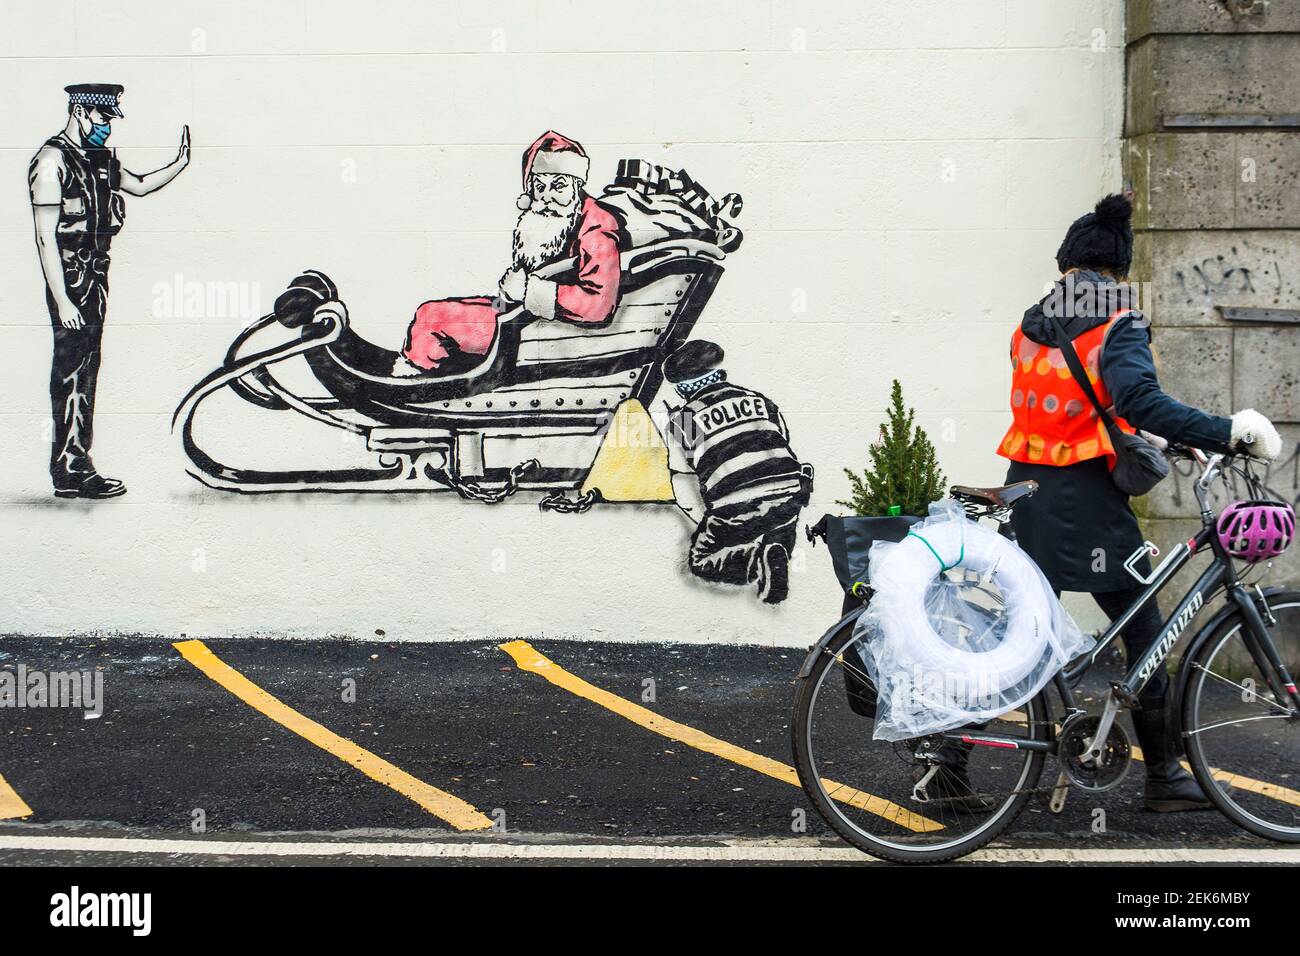 Artist Rebel Bear leaves an art work of Santa being clamped by police officers on a wall on Leith walk.  Credit: Euan Cherry Stock Photo